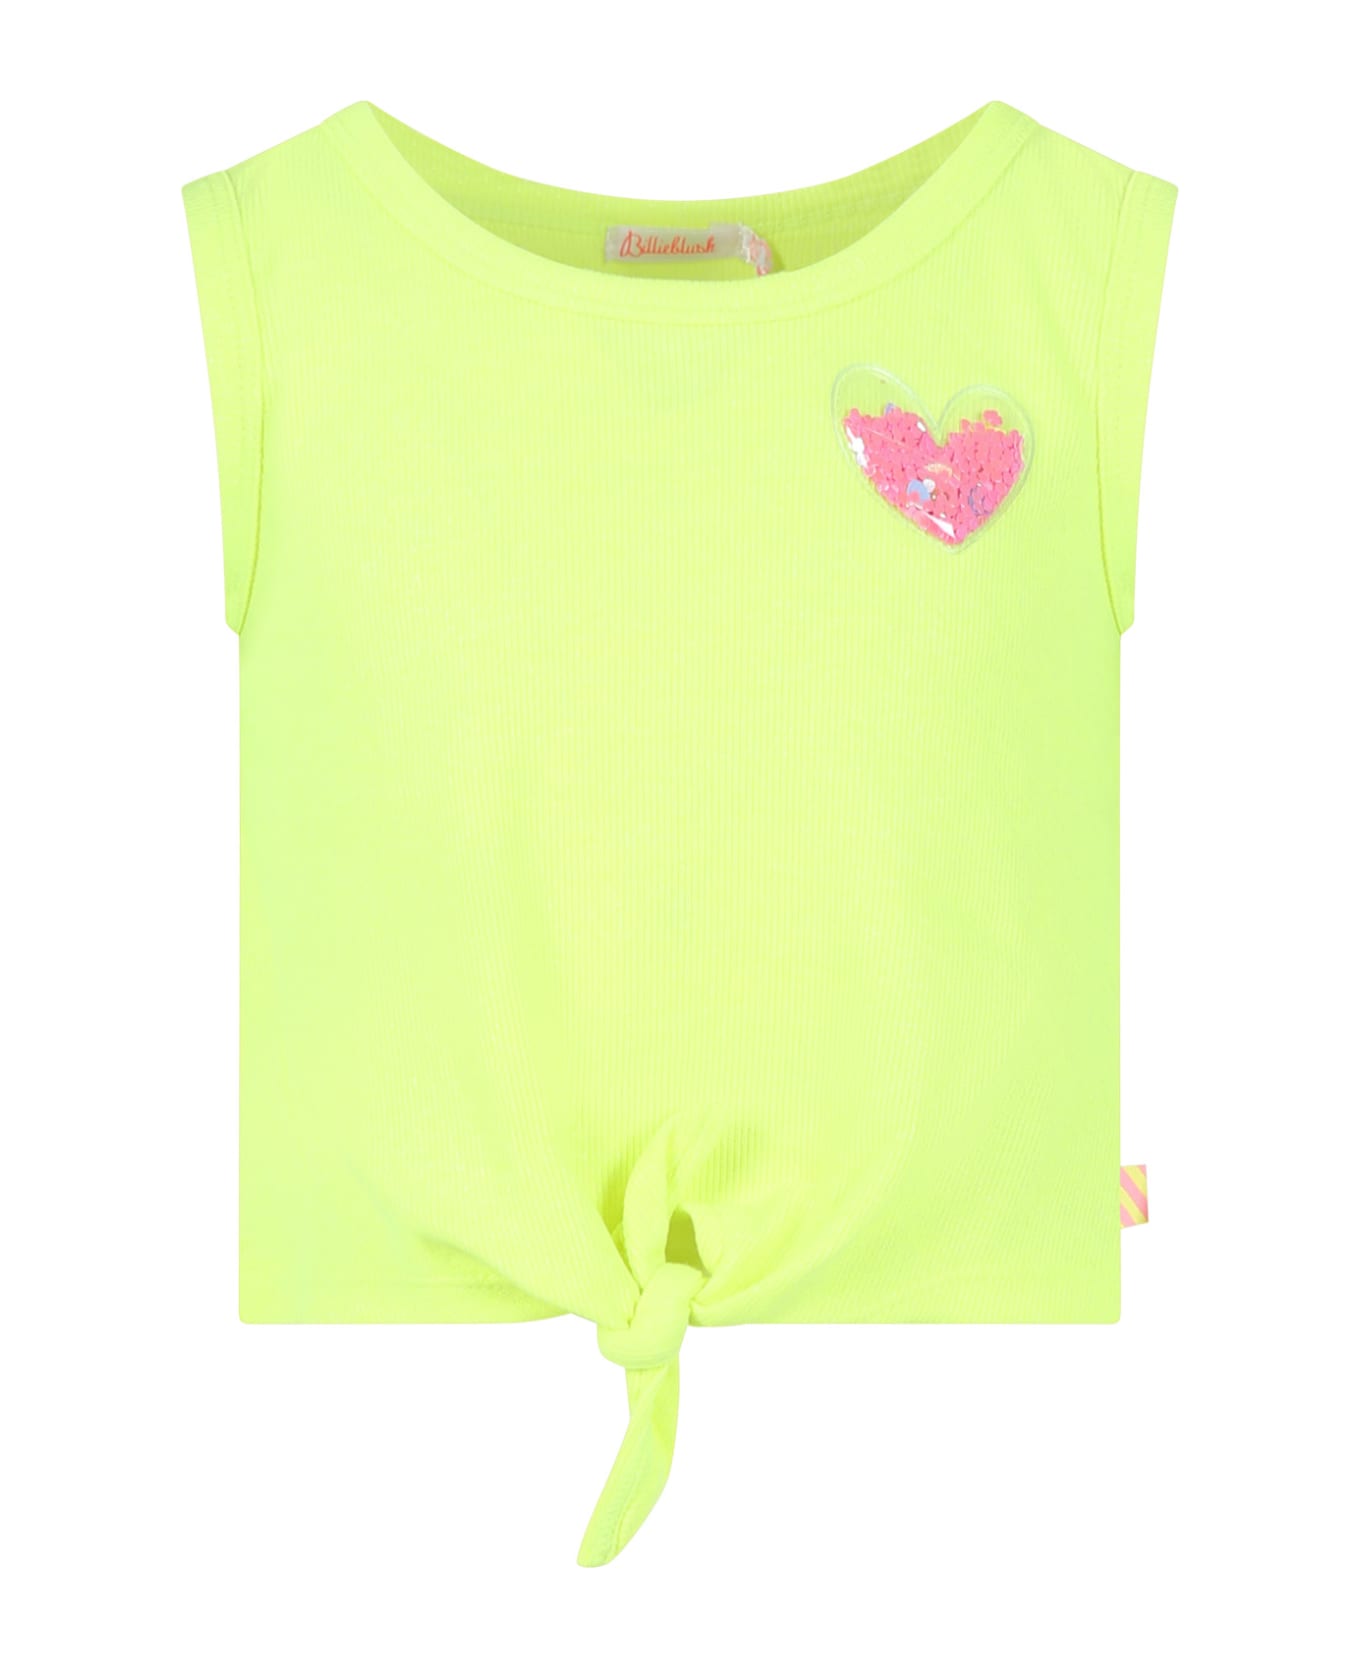 Billieblush Yellow Tank Top For Girl With Heart-shaped Bagde - Yellow